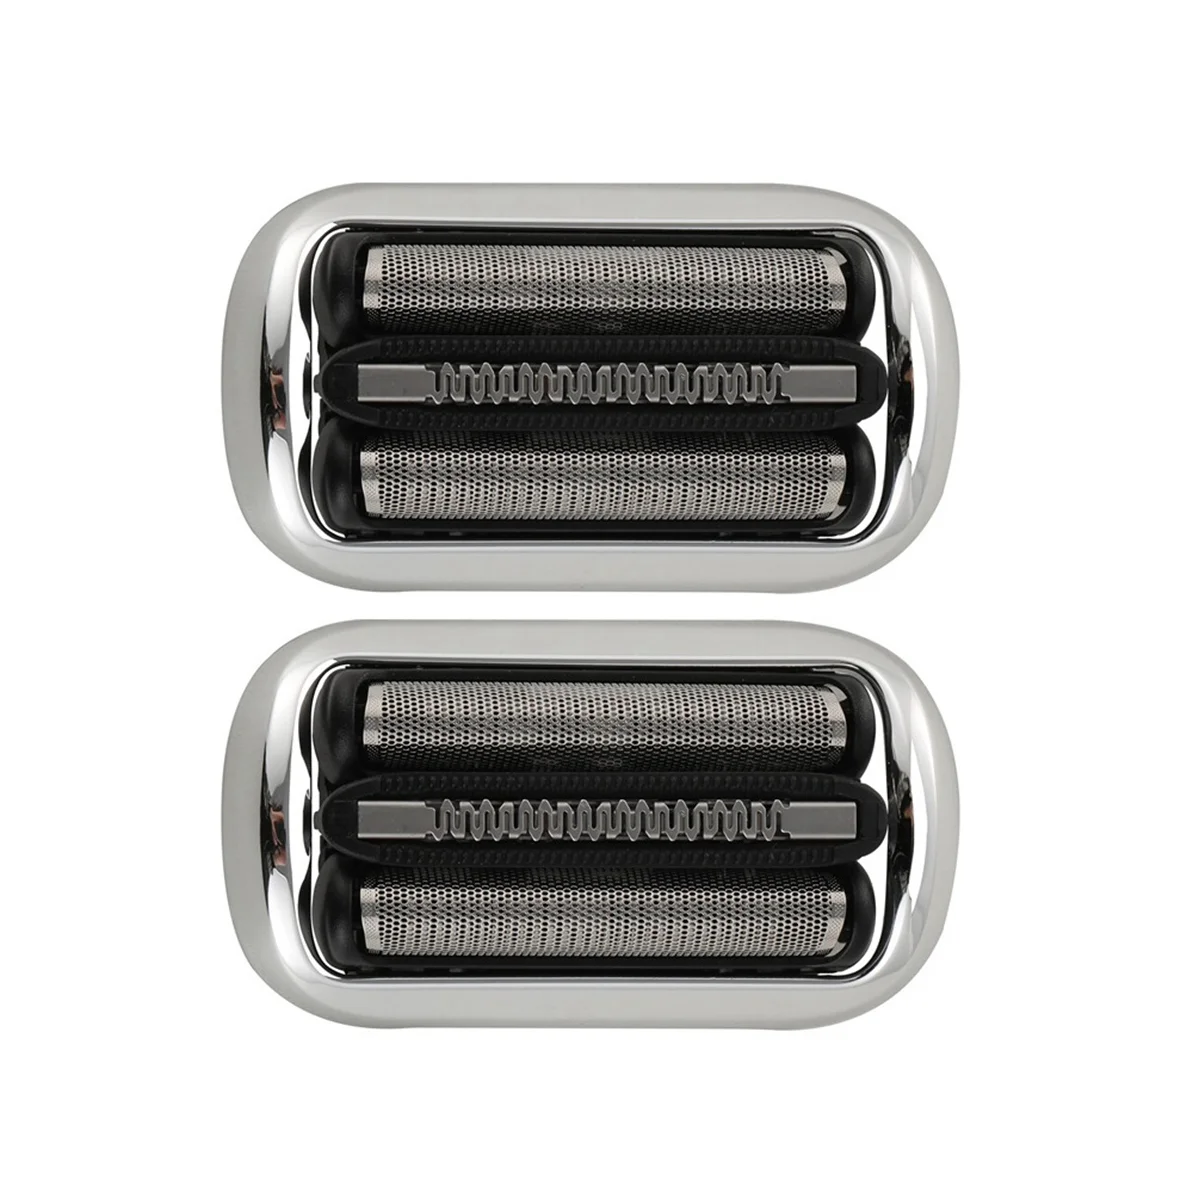 

73S Replacement Shaver Head for Braun Electric Razor Series 7 S7 7020S, 7025S, 7085Cc, 7027Cs, 7071Cc and 7075Cc